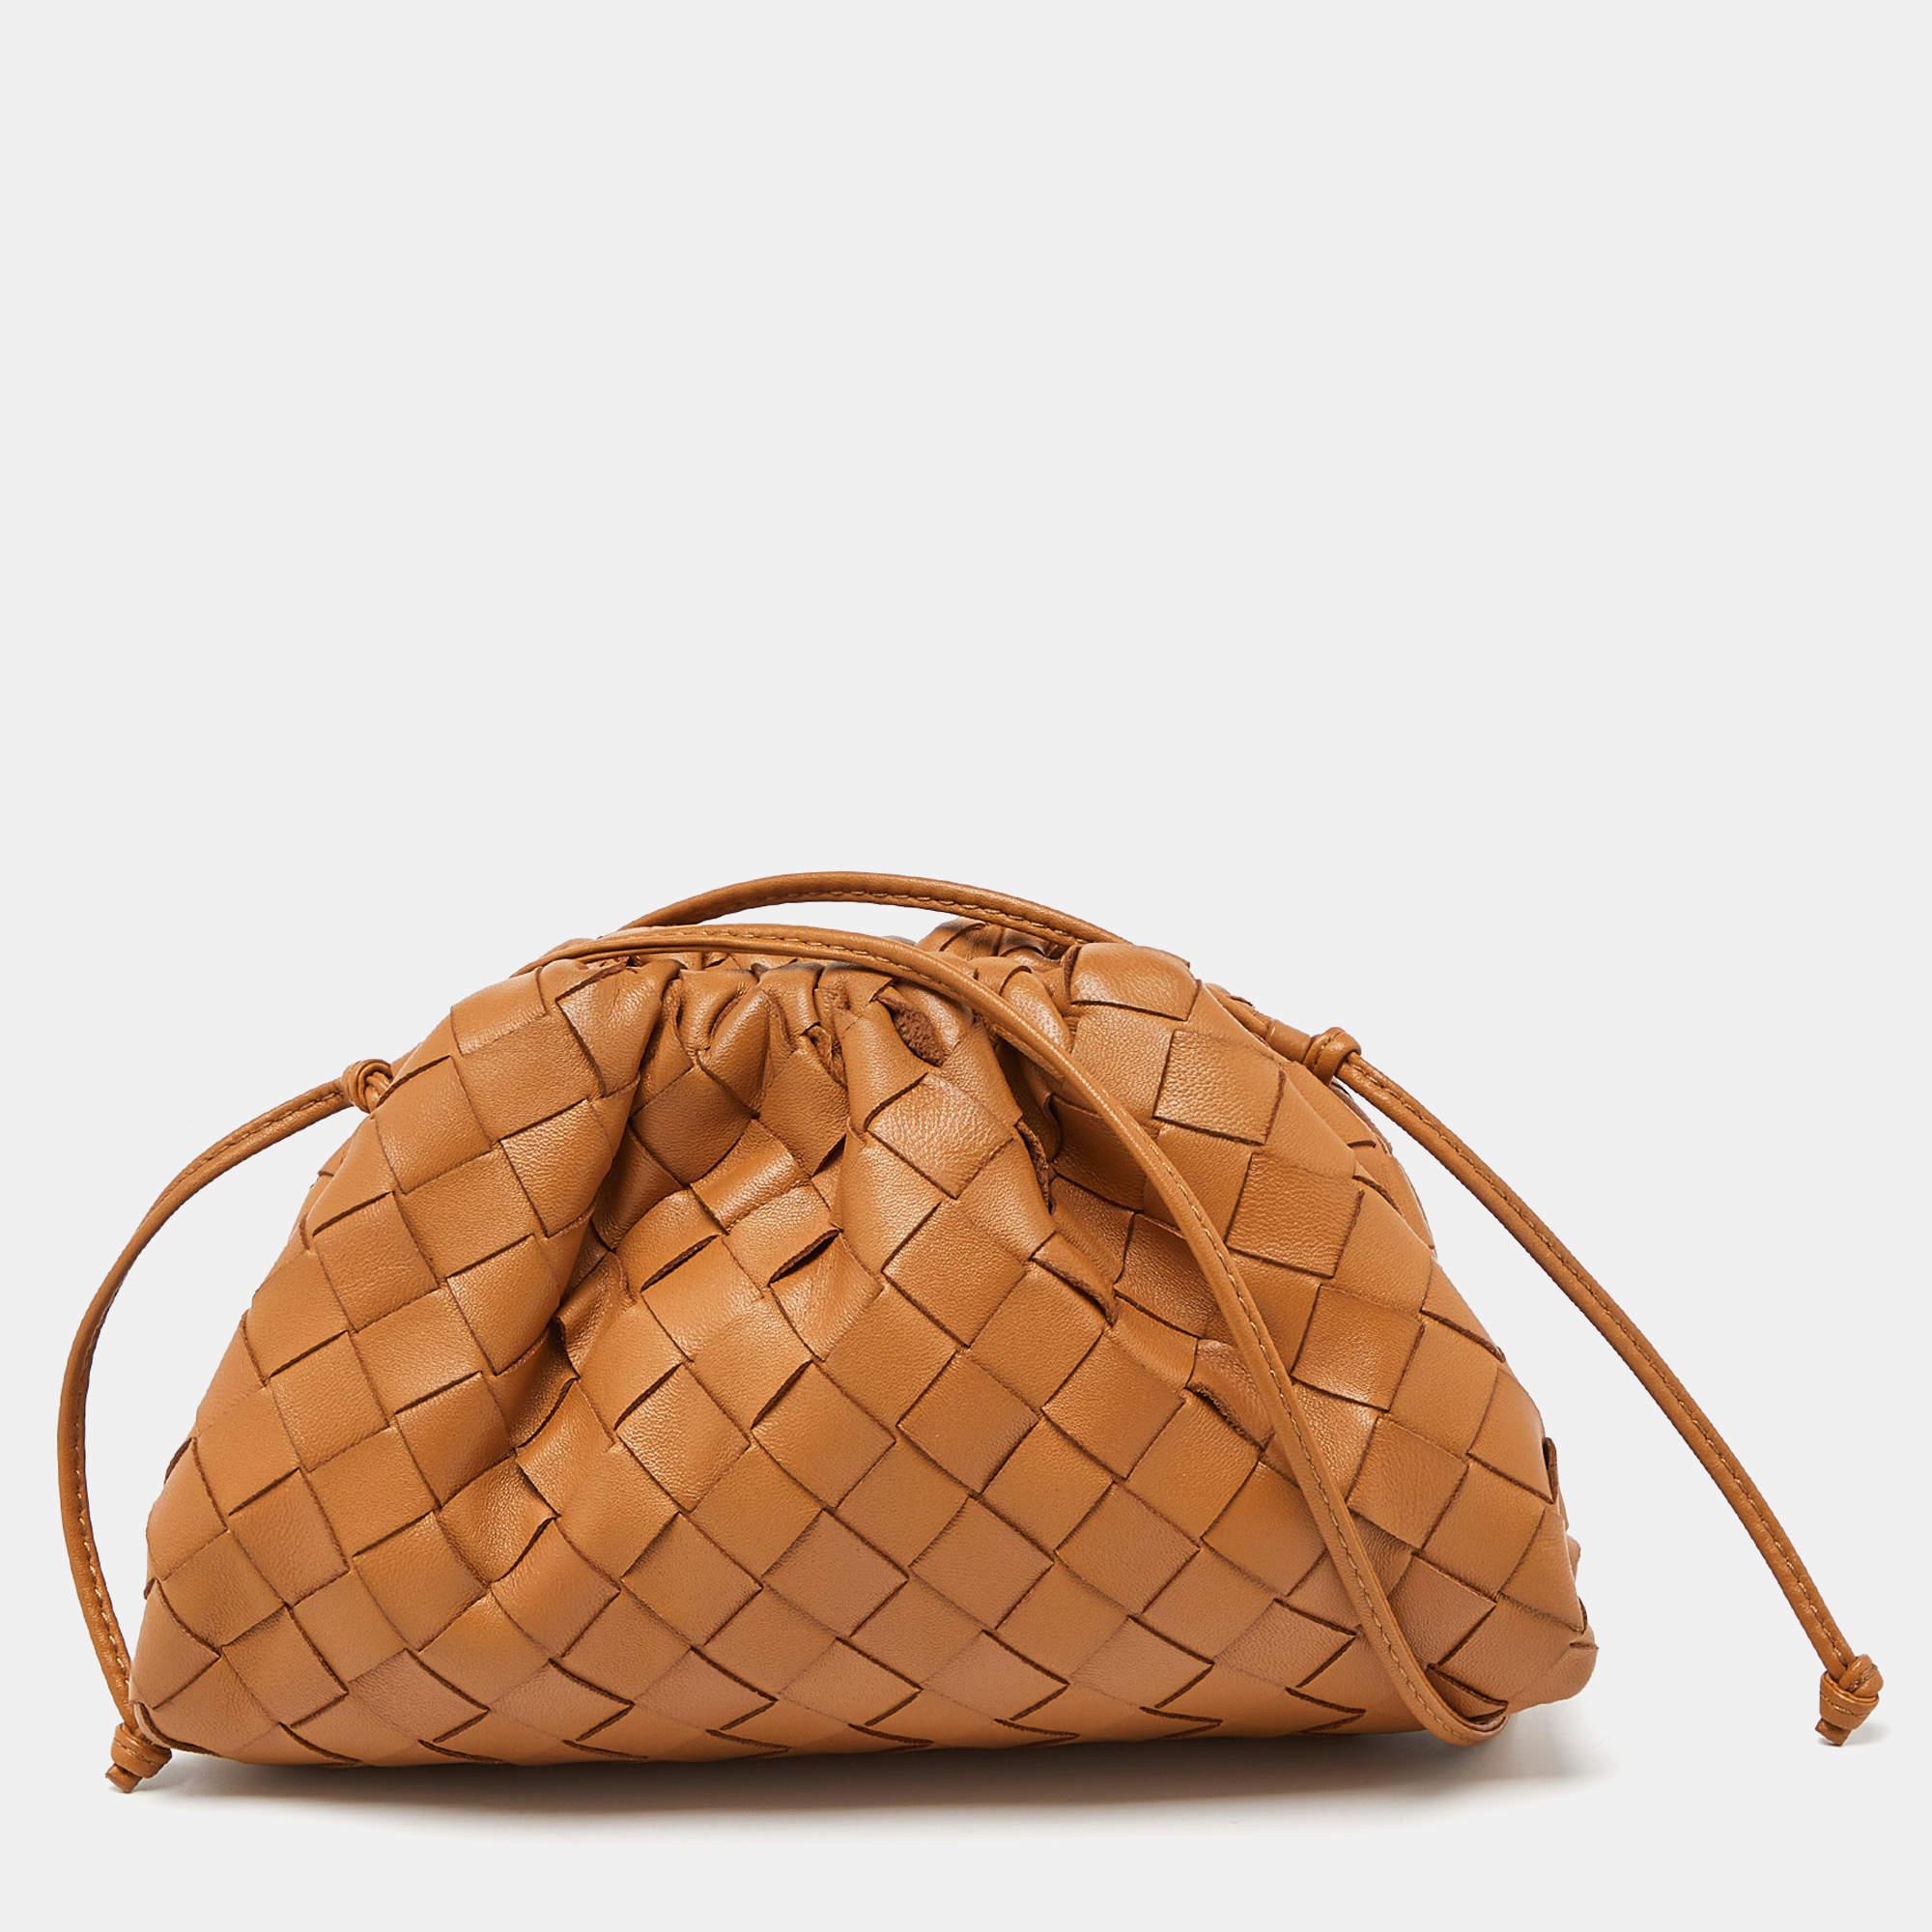 The House of Bottega Veneta has created this stunning 'The Pouch' bag to make an effortless style statement wherever you go. It is made from tan Intrecciato leather and comes with distinct gold-tone hardware. It has a neat leather-lined interior and